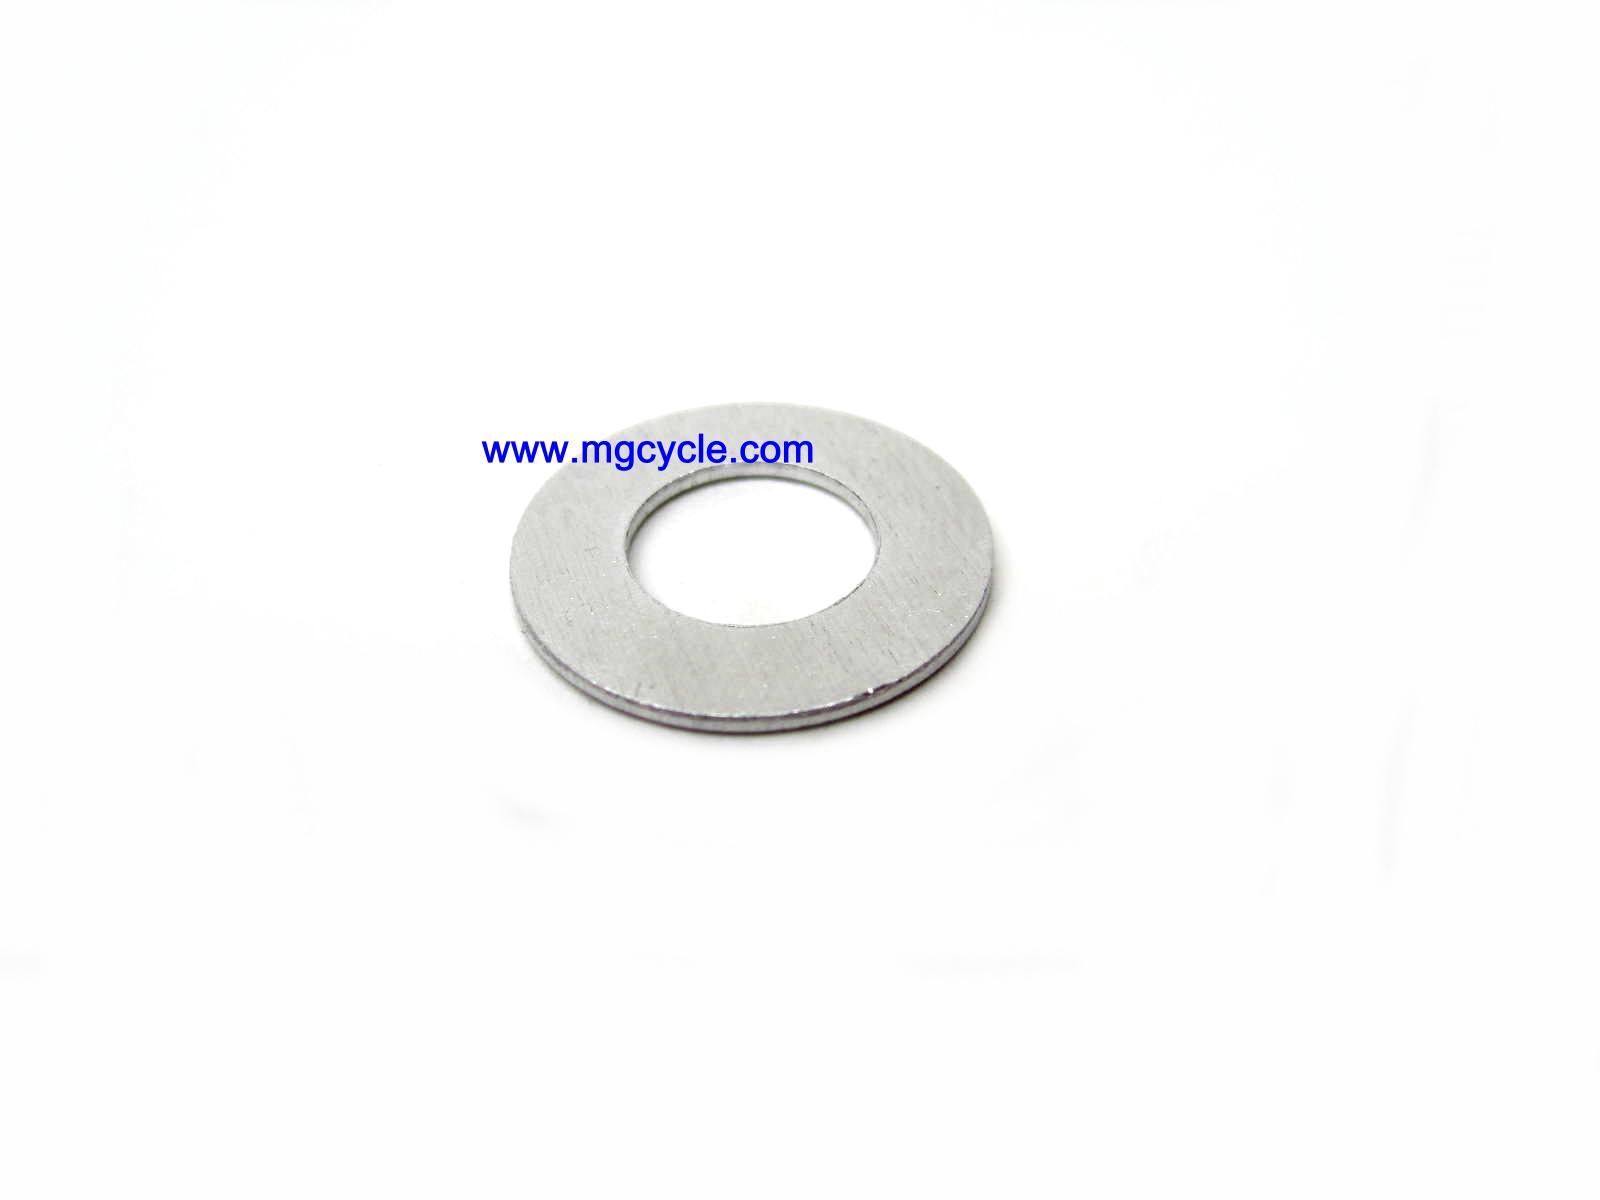 10mm alu sealing washer for overflow and drain plugs